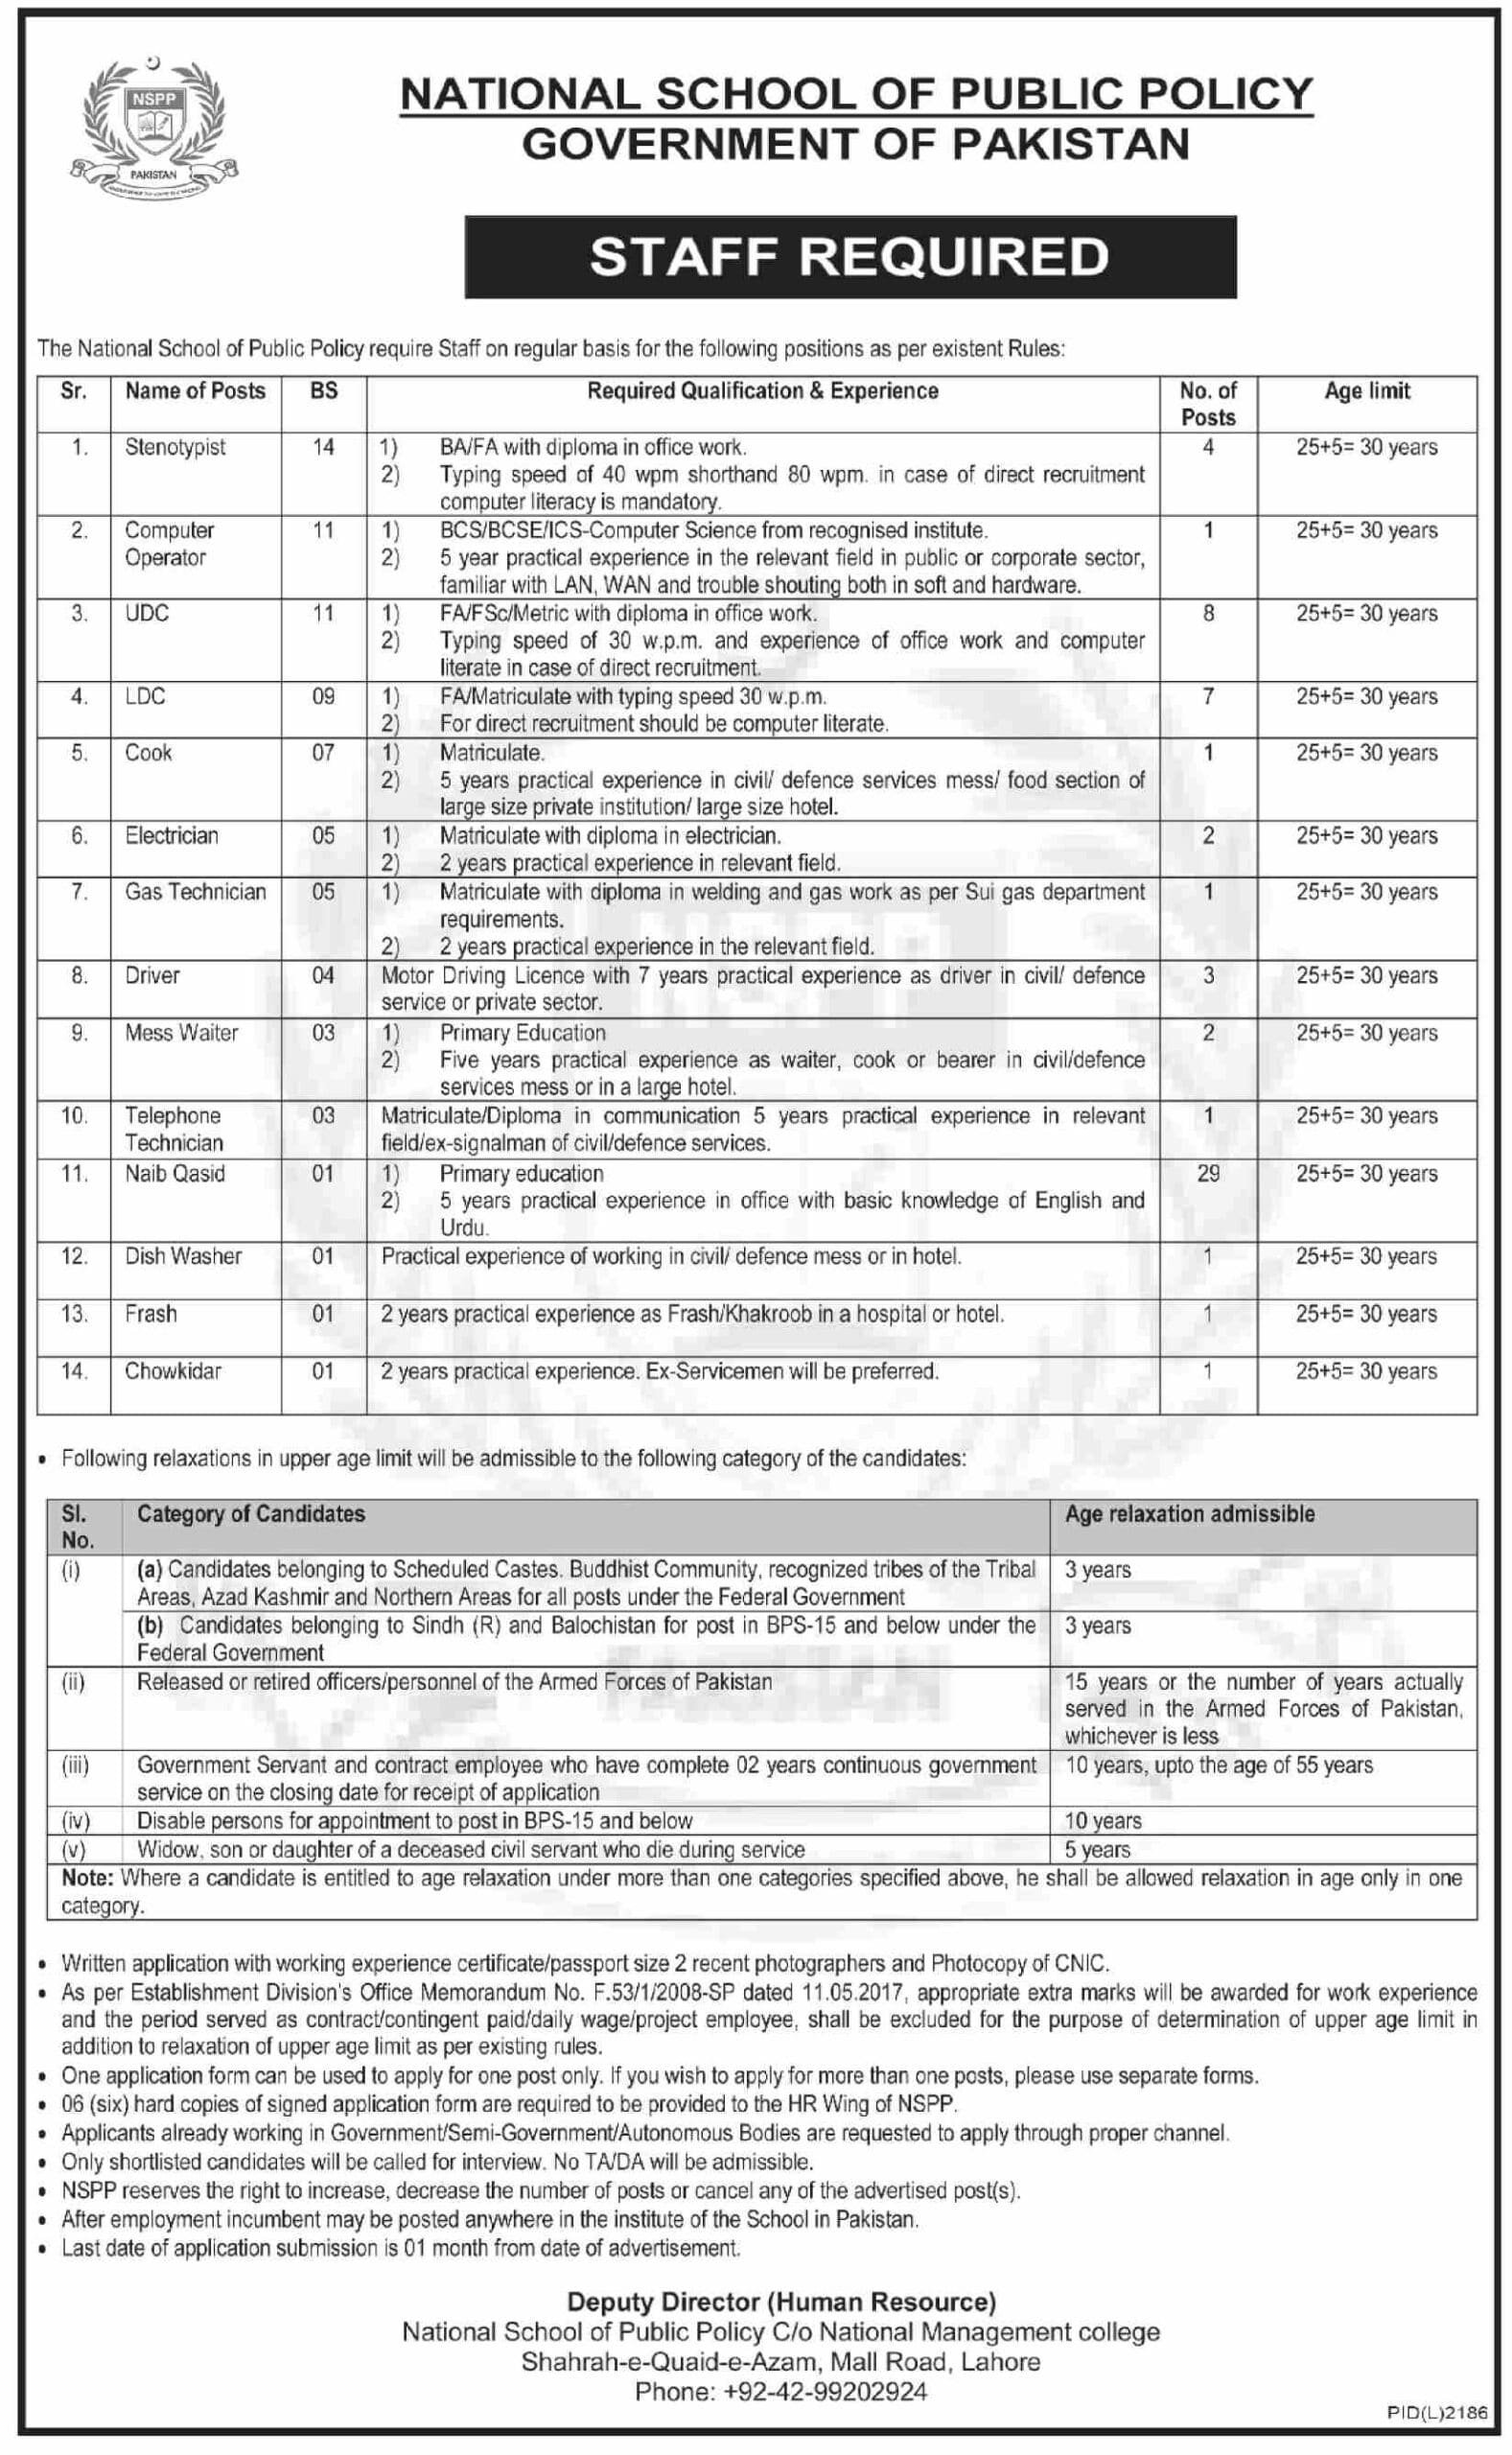 National School of Public Policy Government of Pakistan jobs 2023